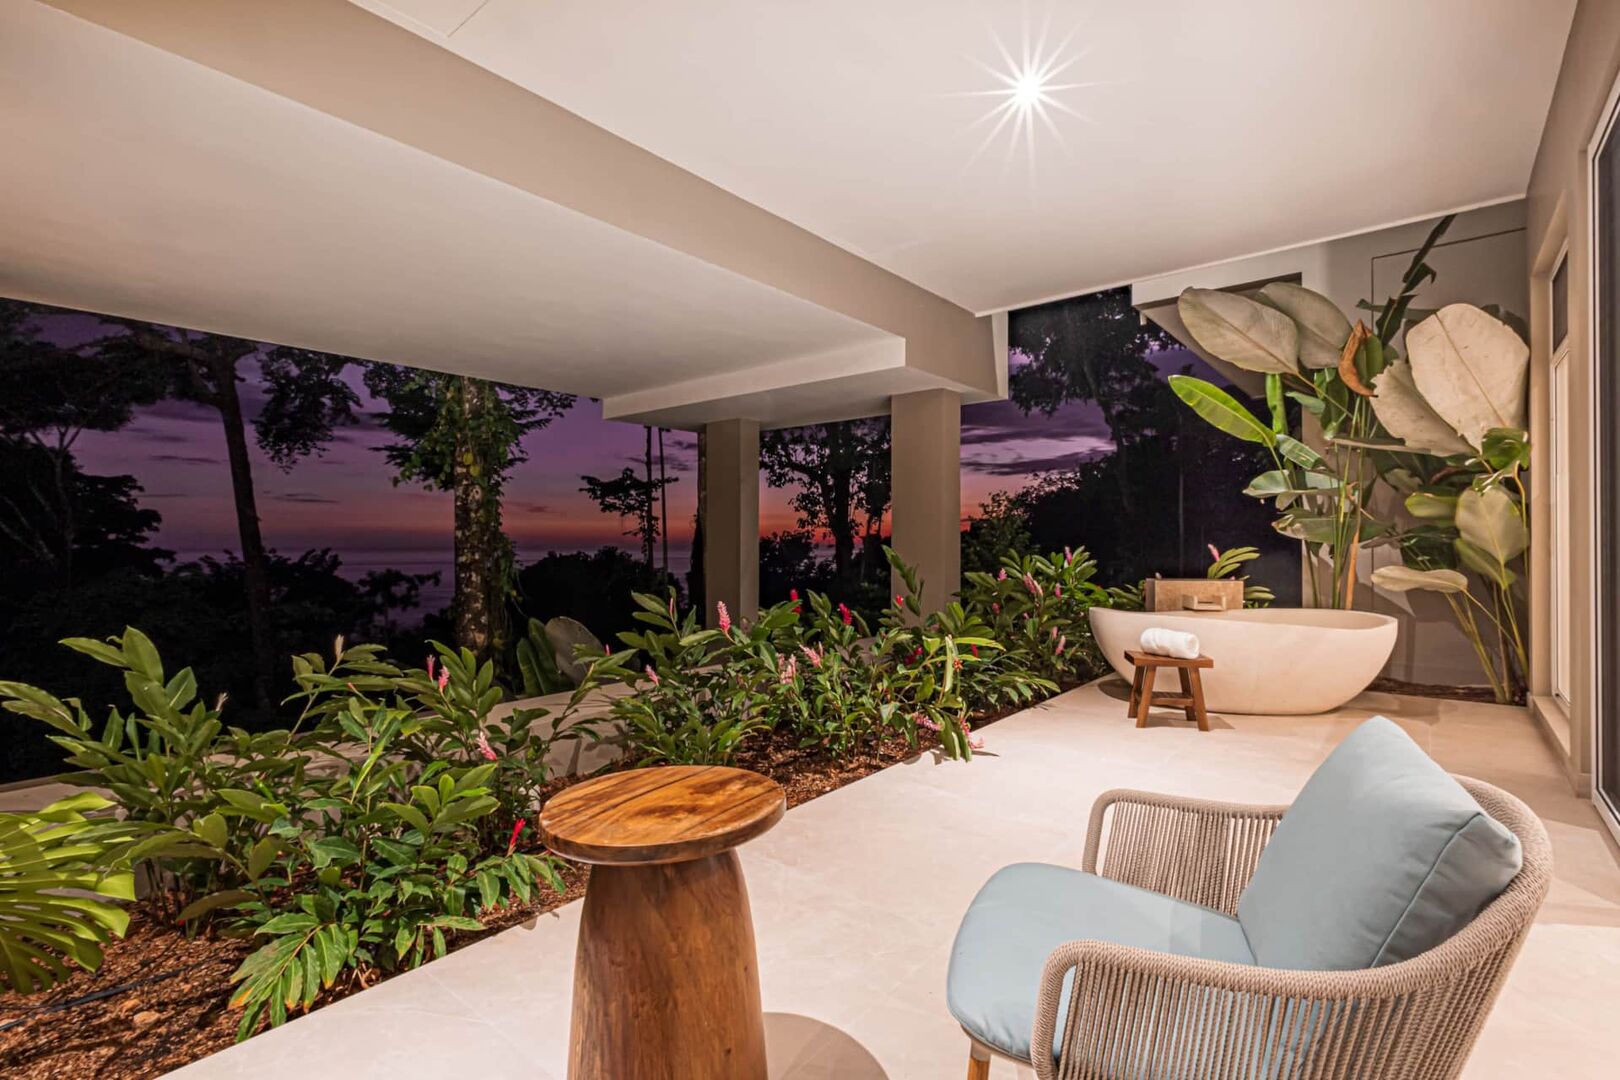 Costa Rica Luxury Homes: 3 of Our Newest Listings